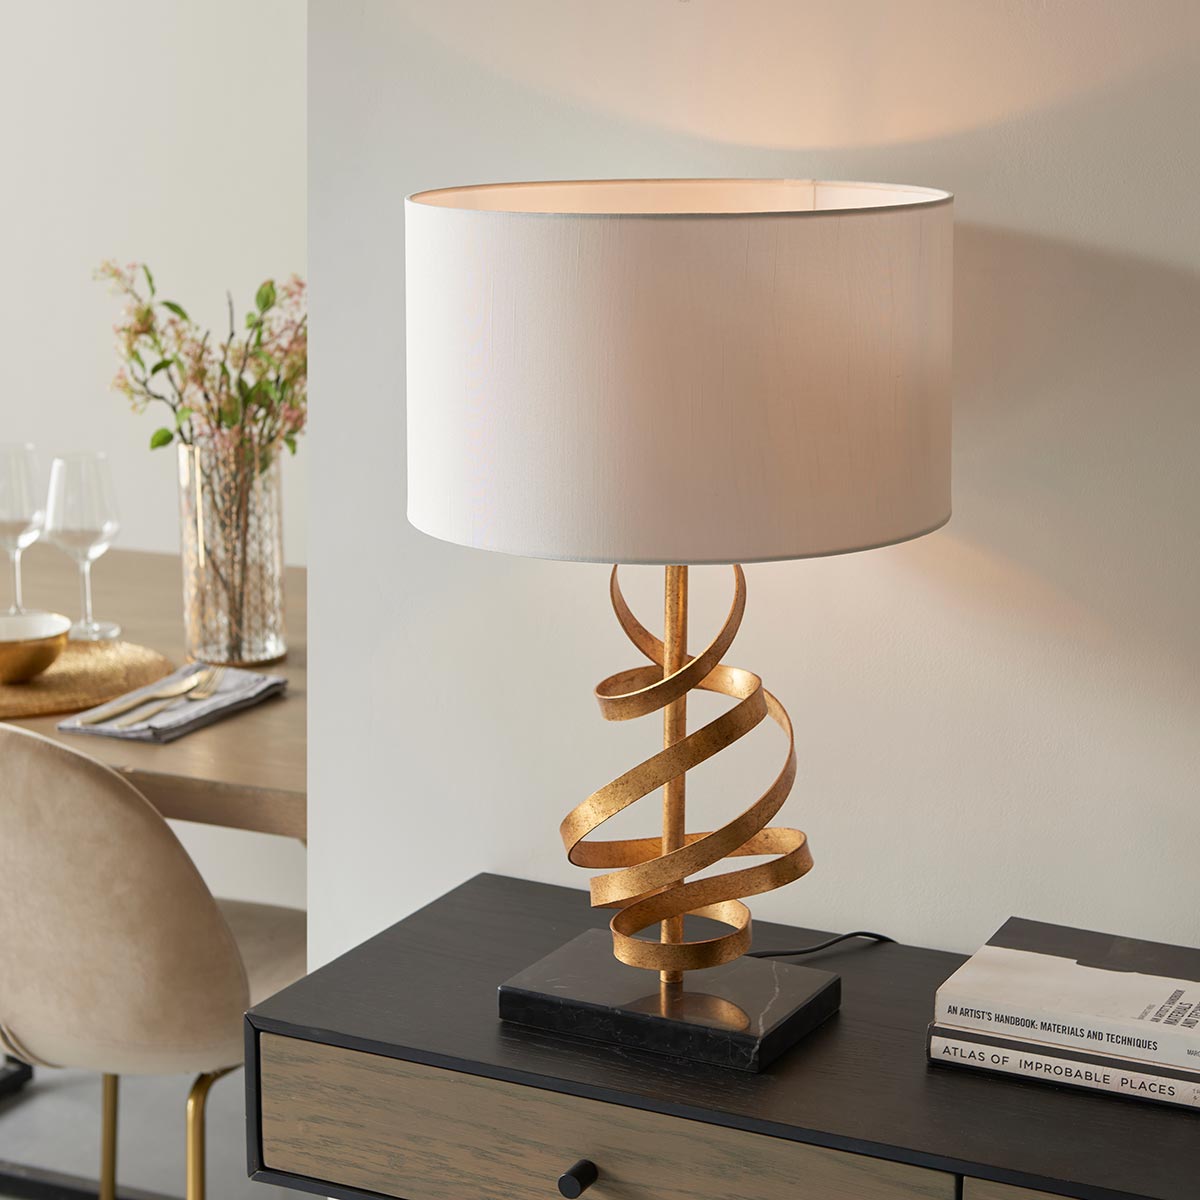 Contemporary 1 Light Gold Leaf Ribbon Table Lamp Ivory Cotton Shade